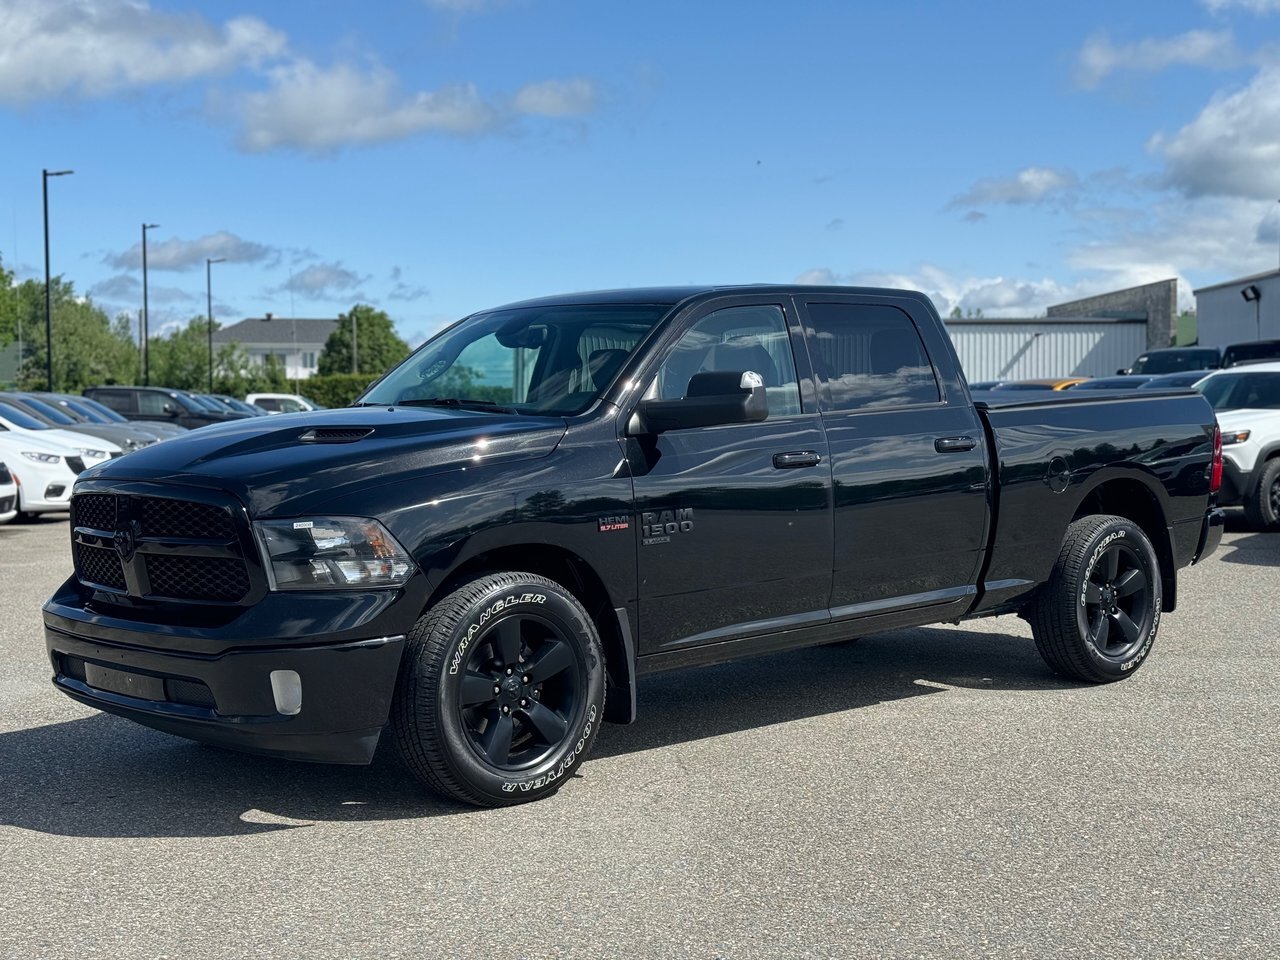 2021 Ram 1500 Classic SLT BLACK APPEARANCE CREWCAB V8 4X4 | TECH AND LUX